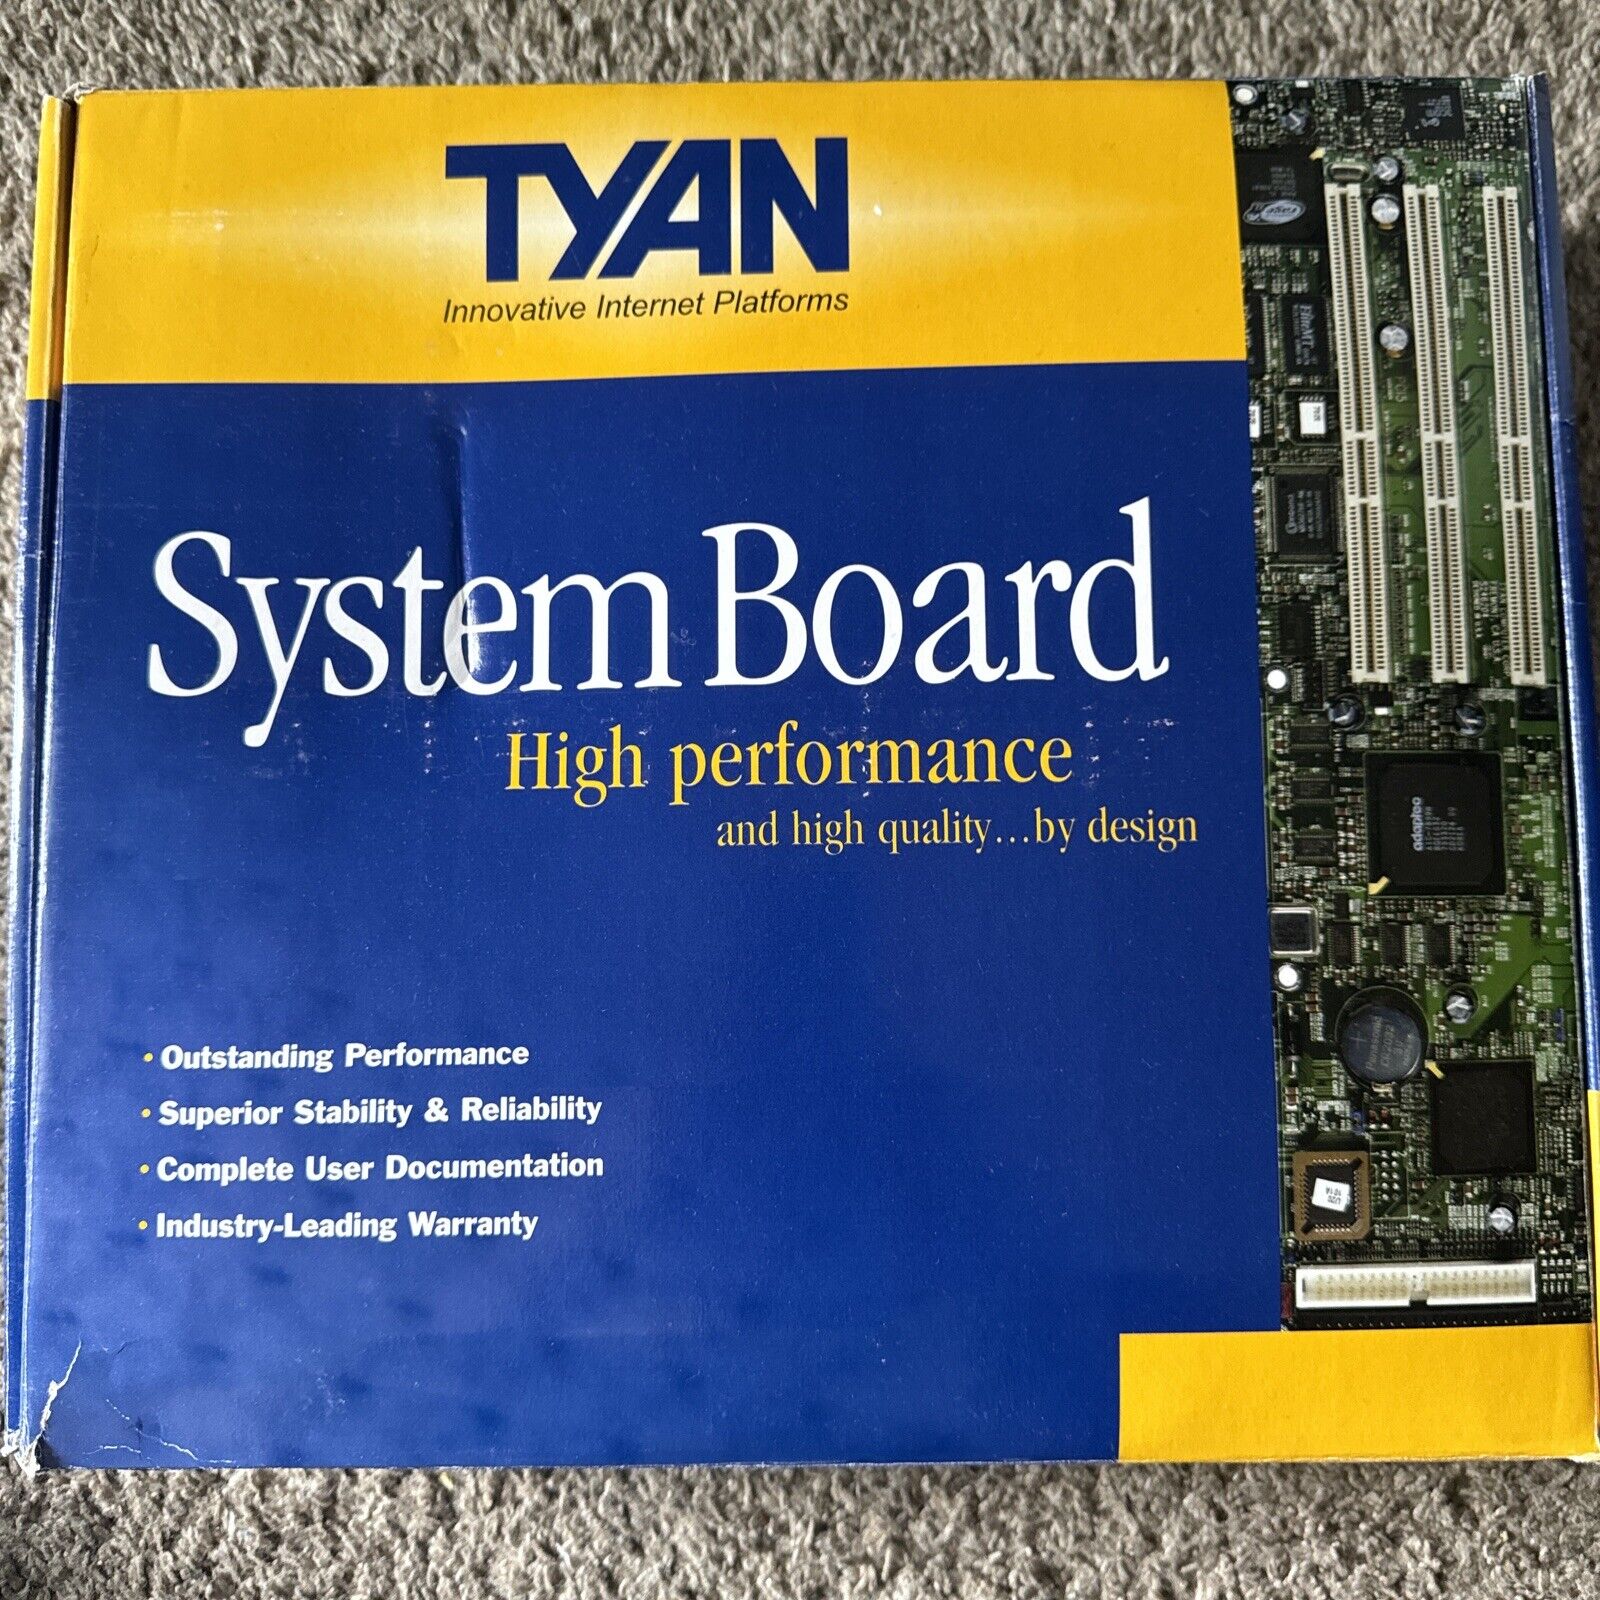 Ryan System Board Tyan S2882G3NR Thunder K8S Pro Dual Opteron